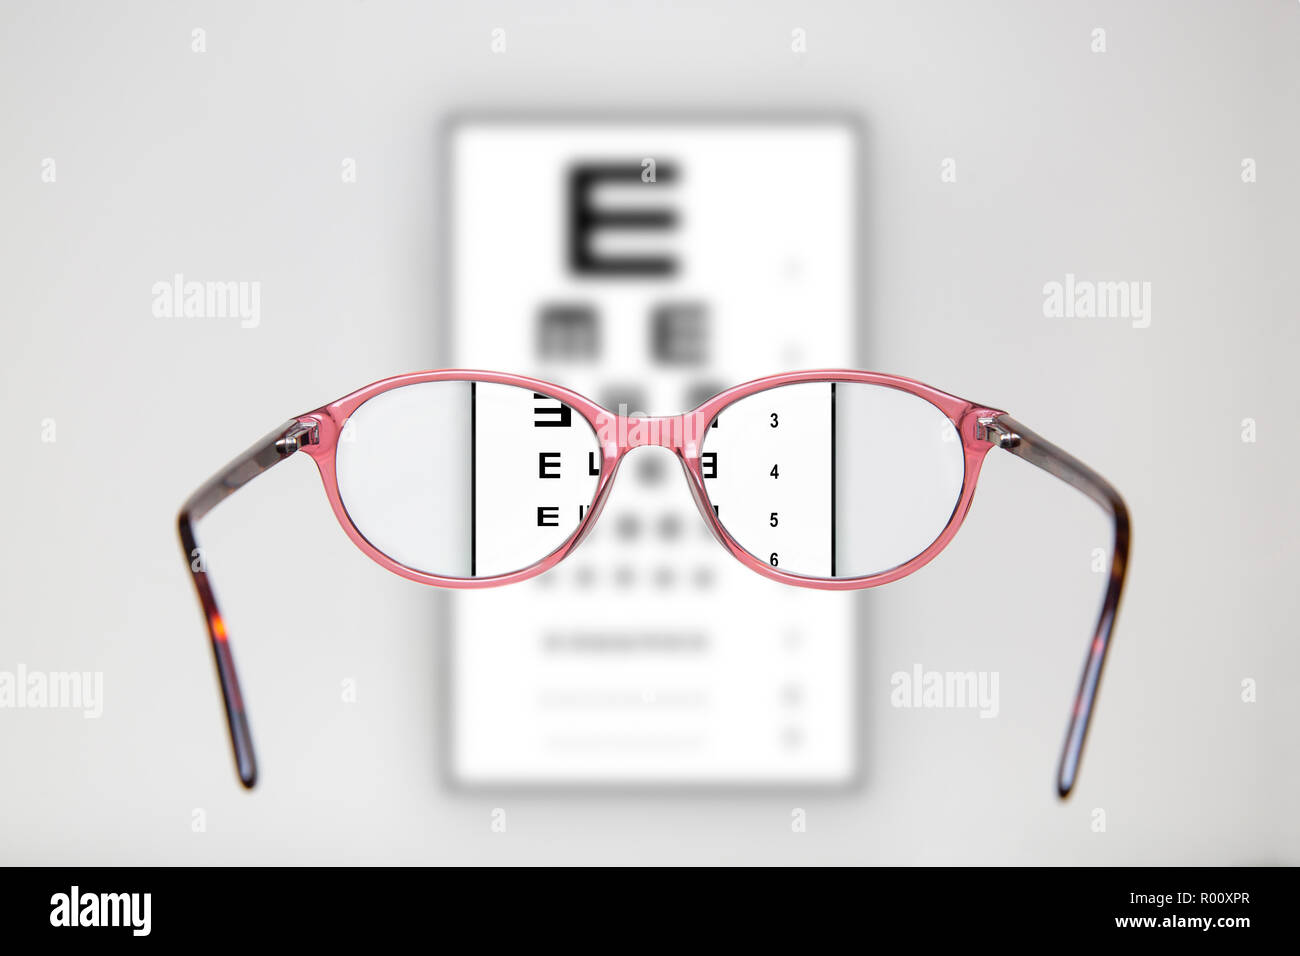 Exam view with optometric table and red glasses Stock Photo